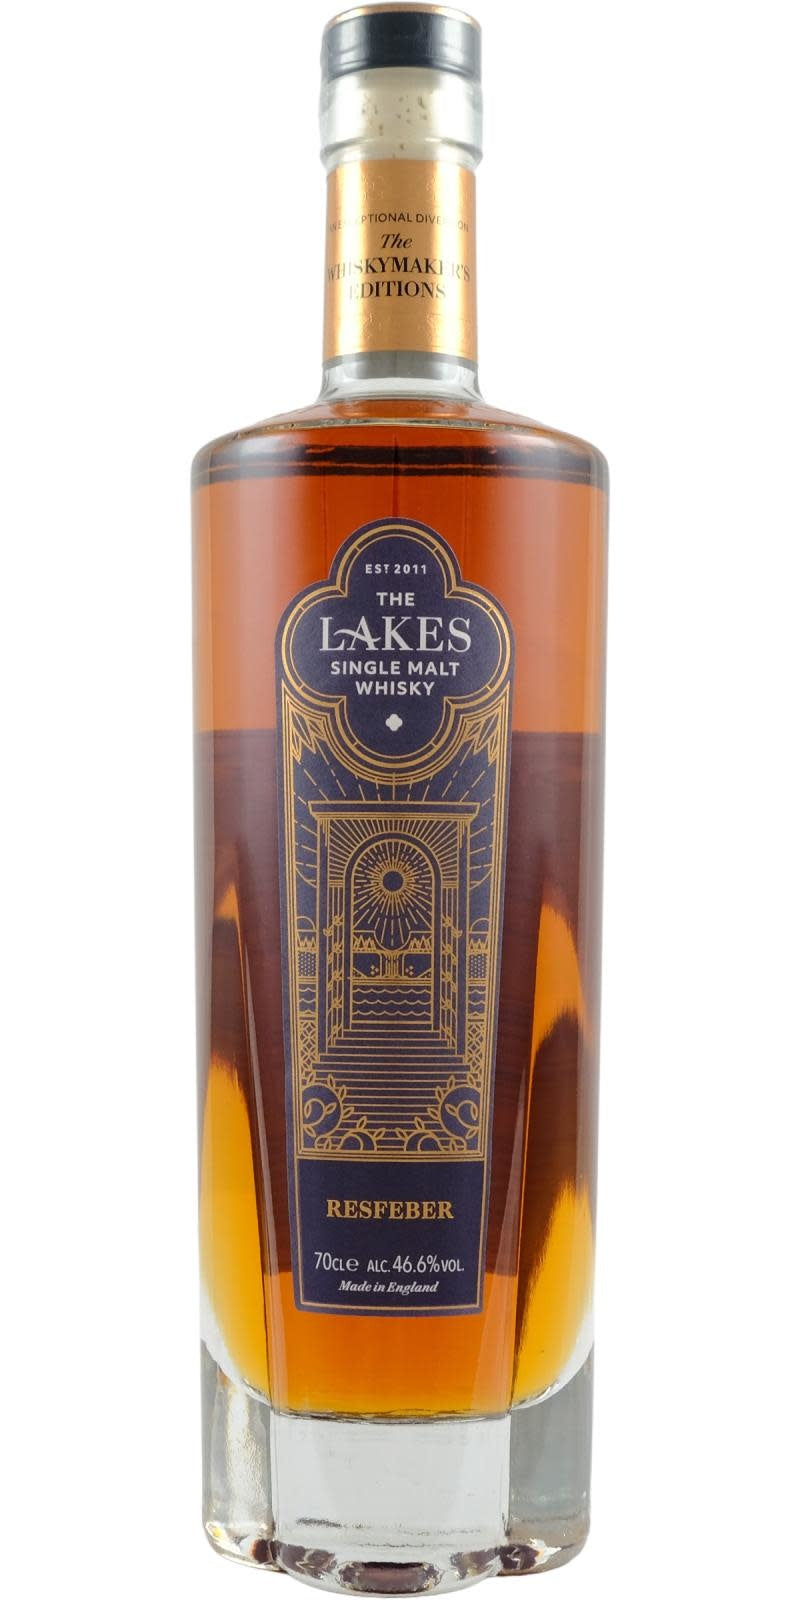 The Lakes Whiskymaker's Editions Resfeber